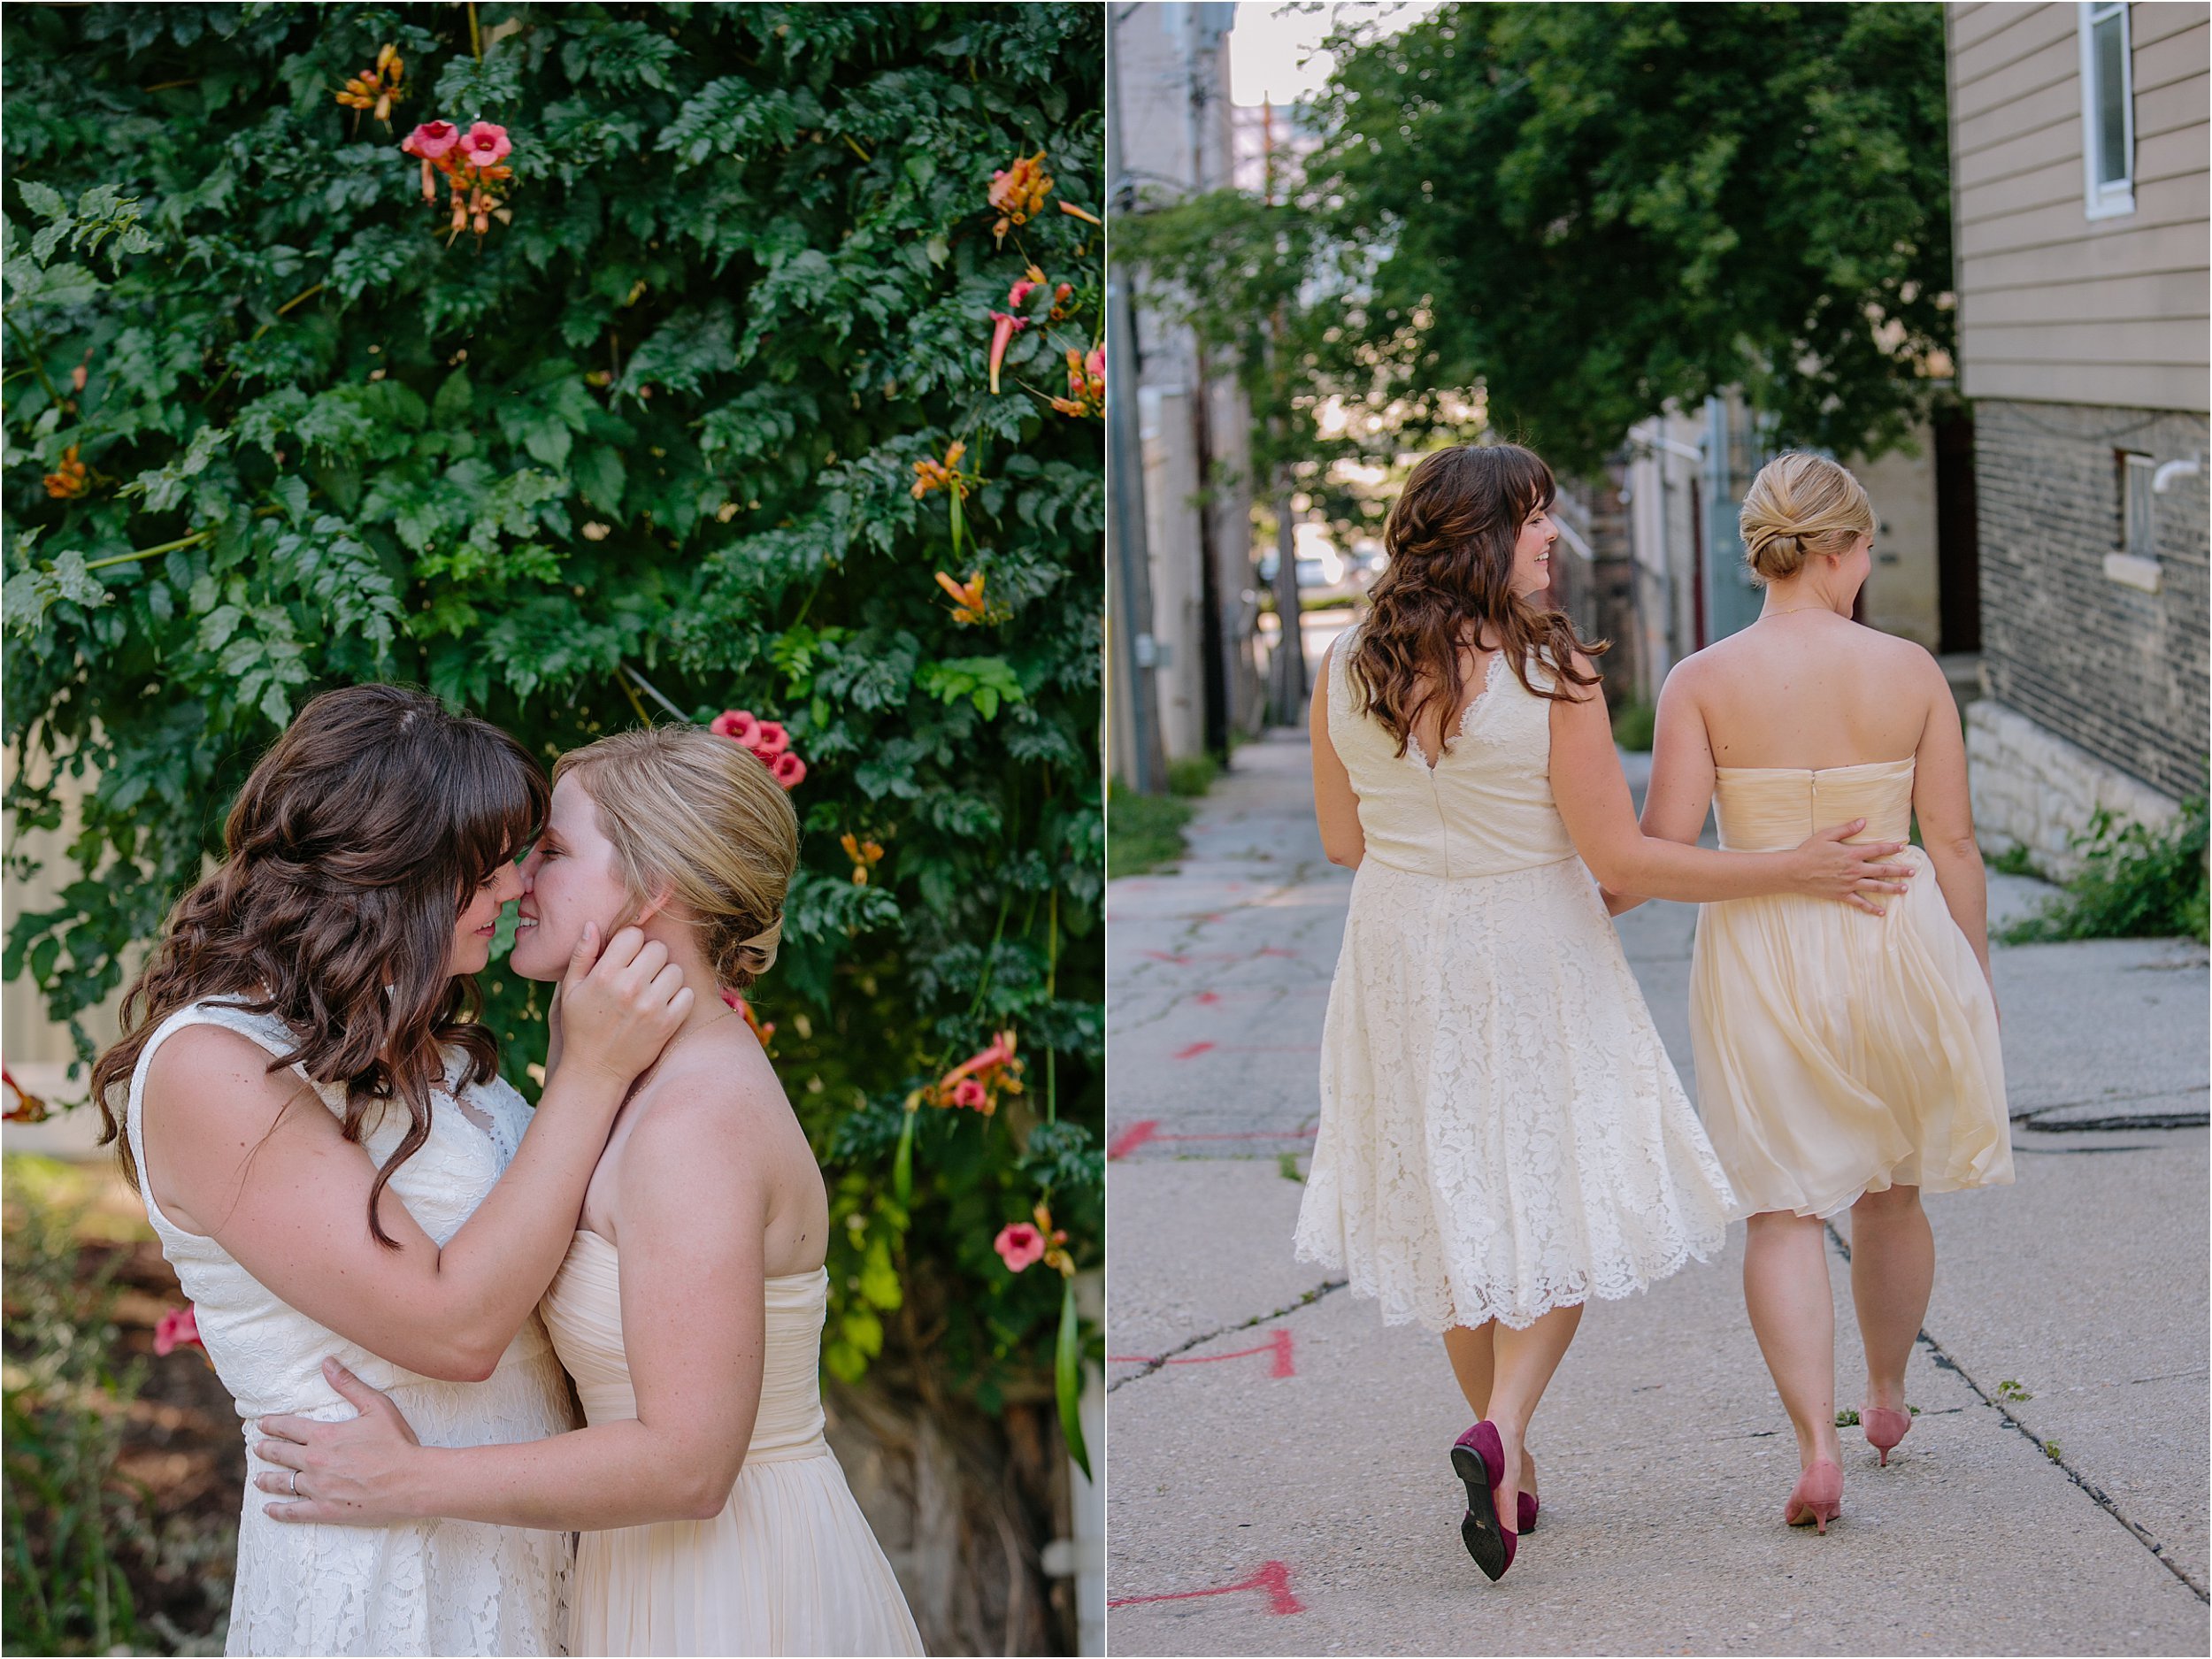 25-two-brides-outdoor-intimate-lgbtq.JPG